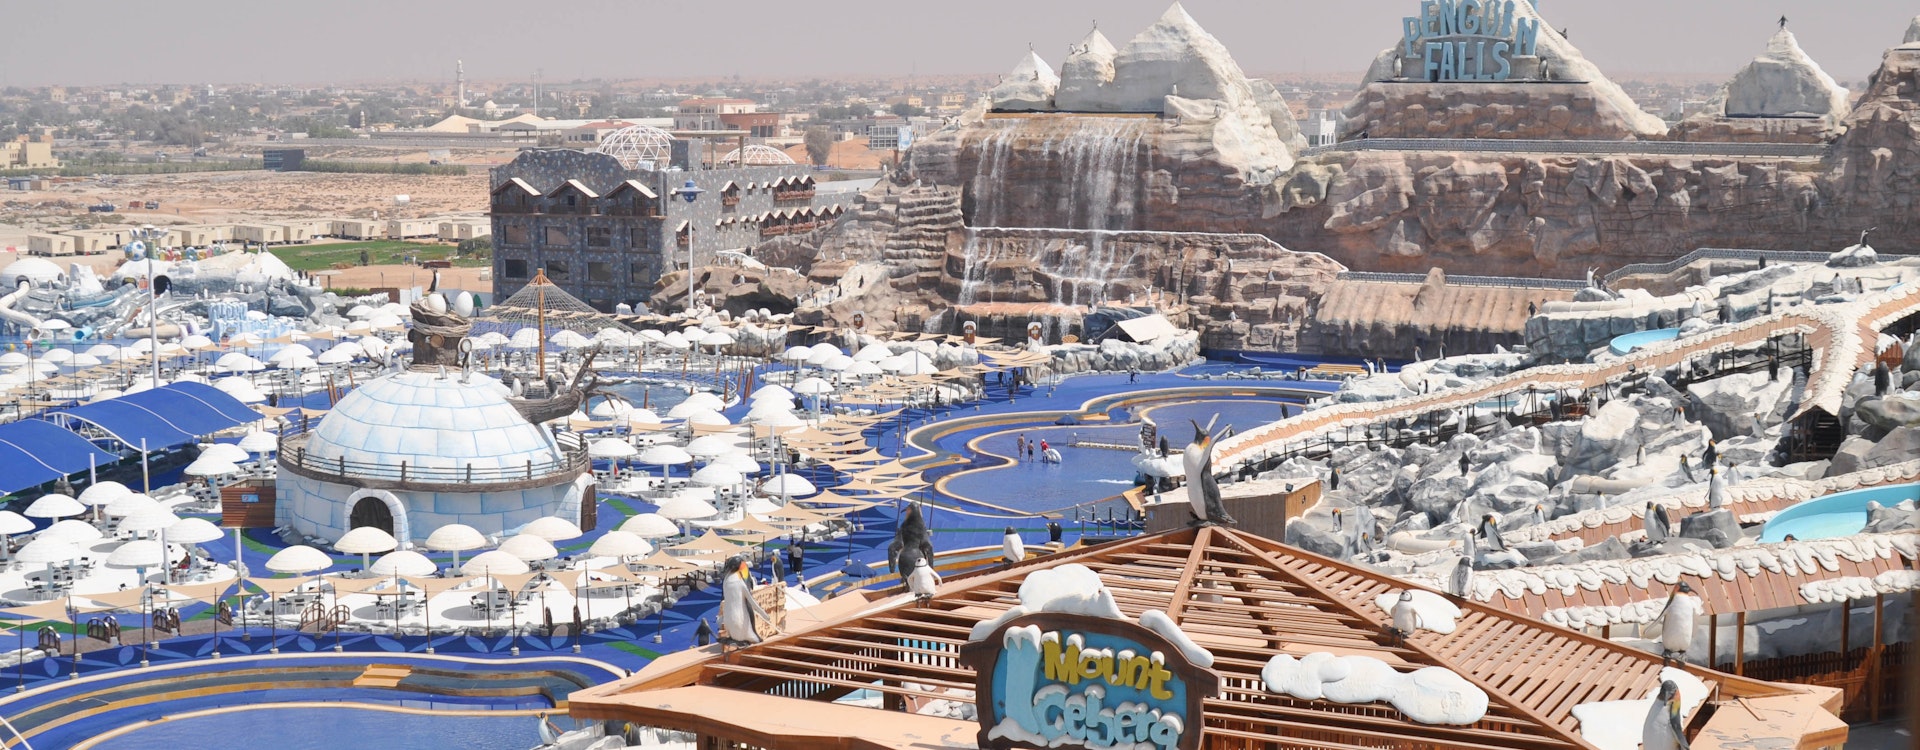 best-water-parks-in-dubai-ice-land-water-park